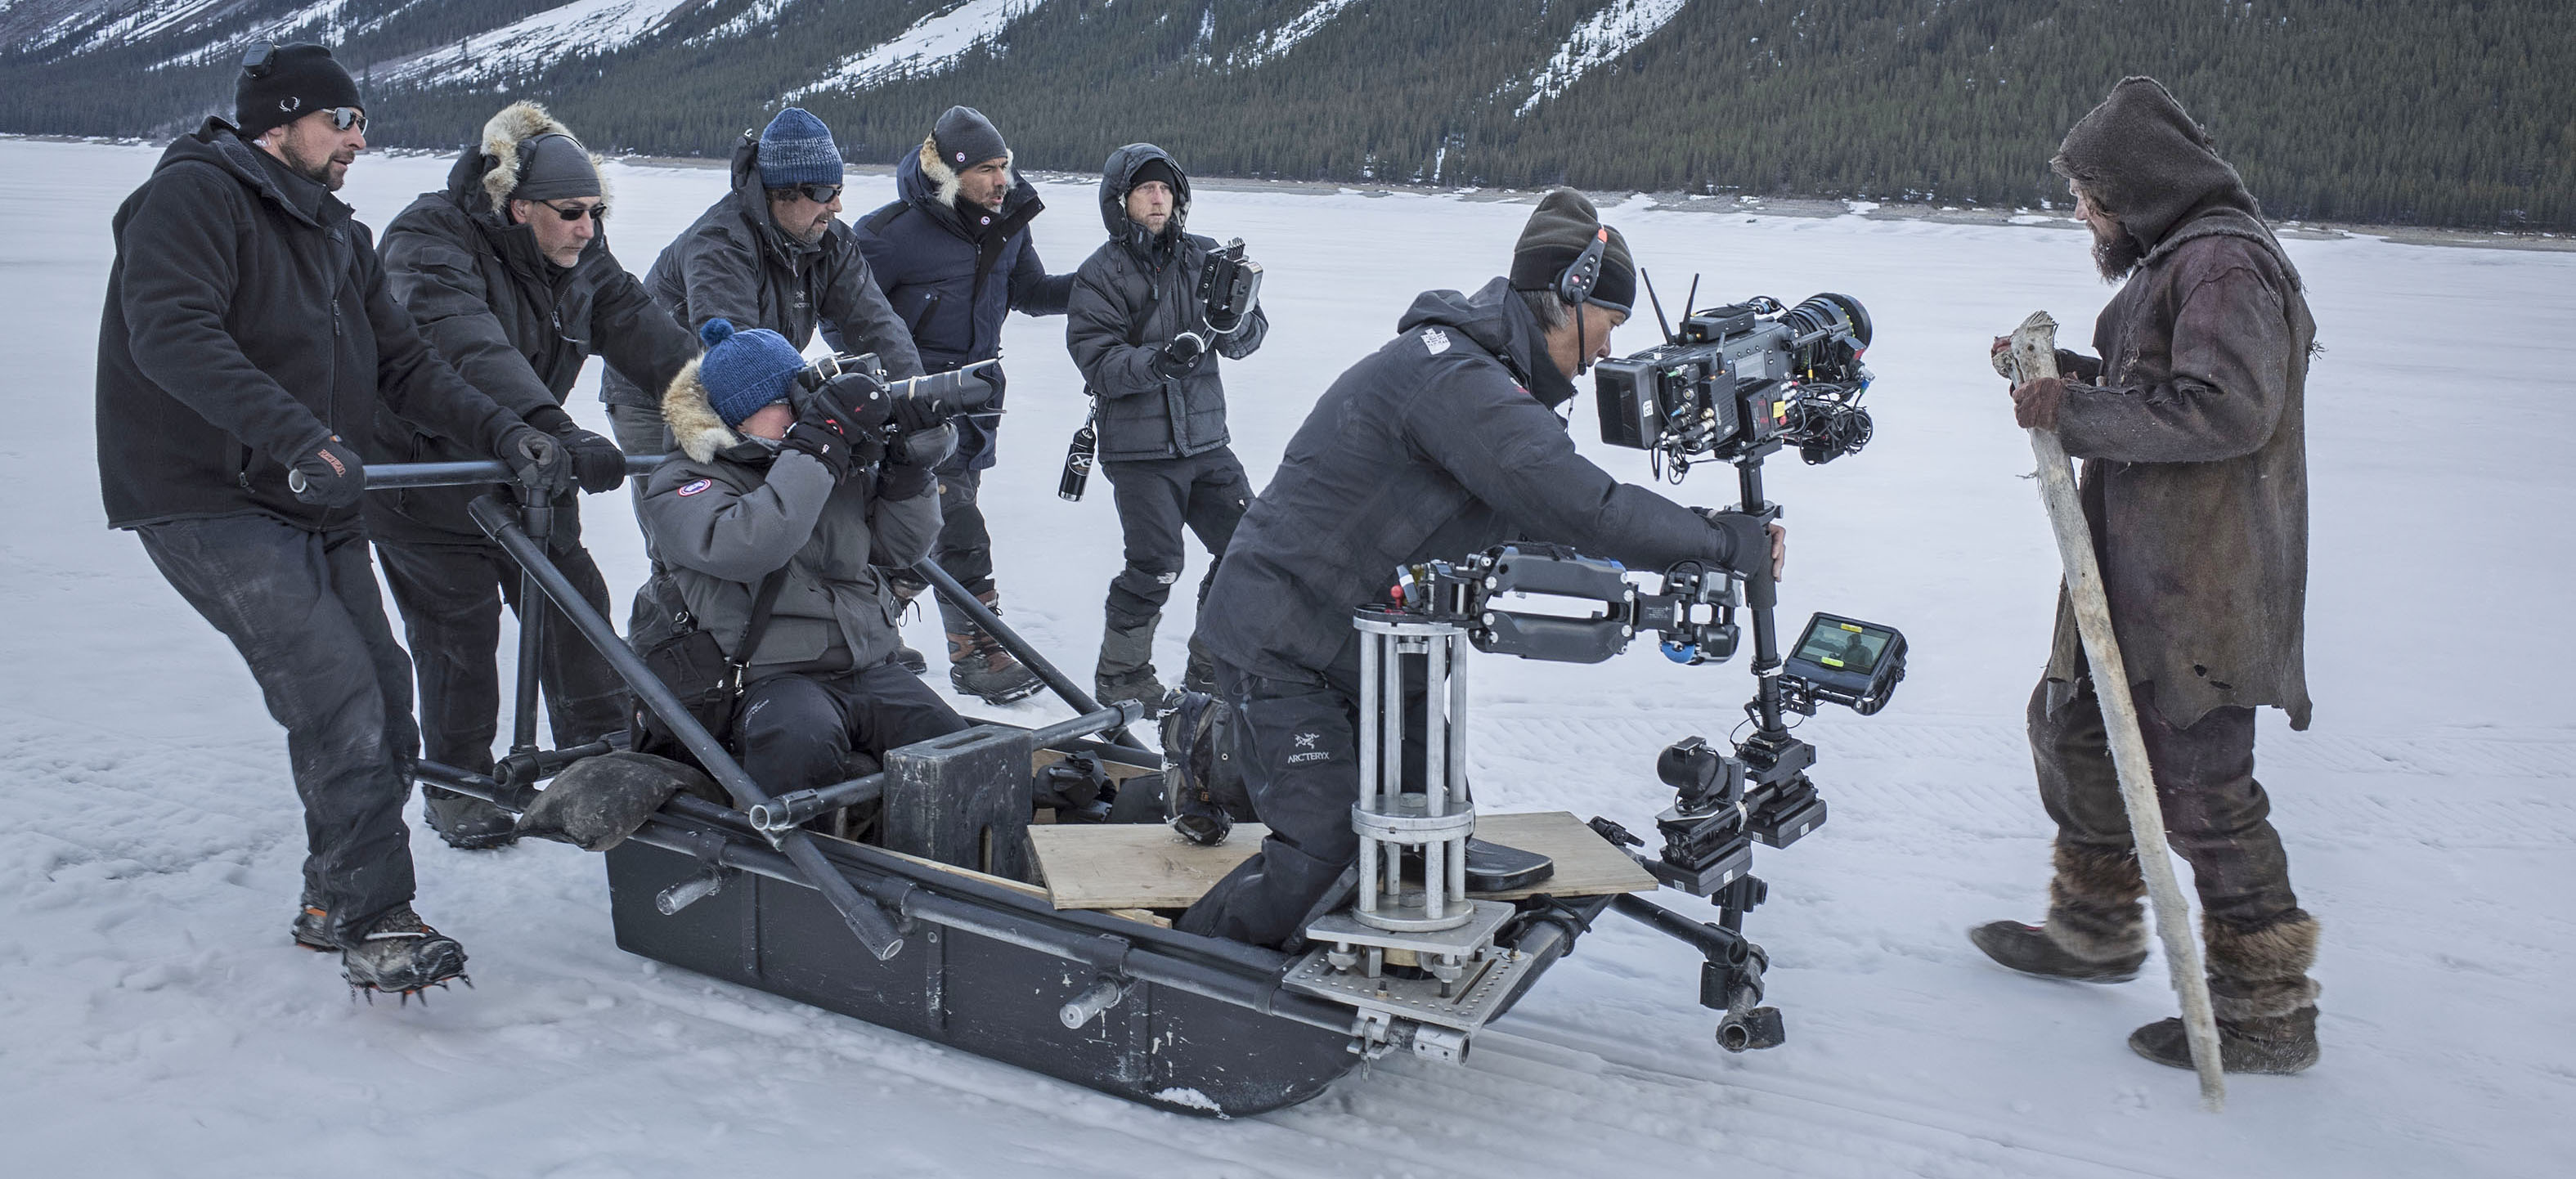 Lubezki and his team used a Steadicam mounted on an ice sled to capture a unique tracking shot over the snow.